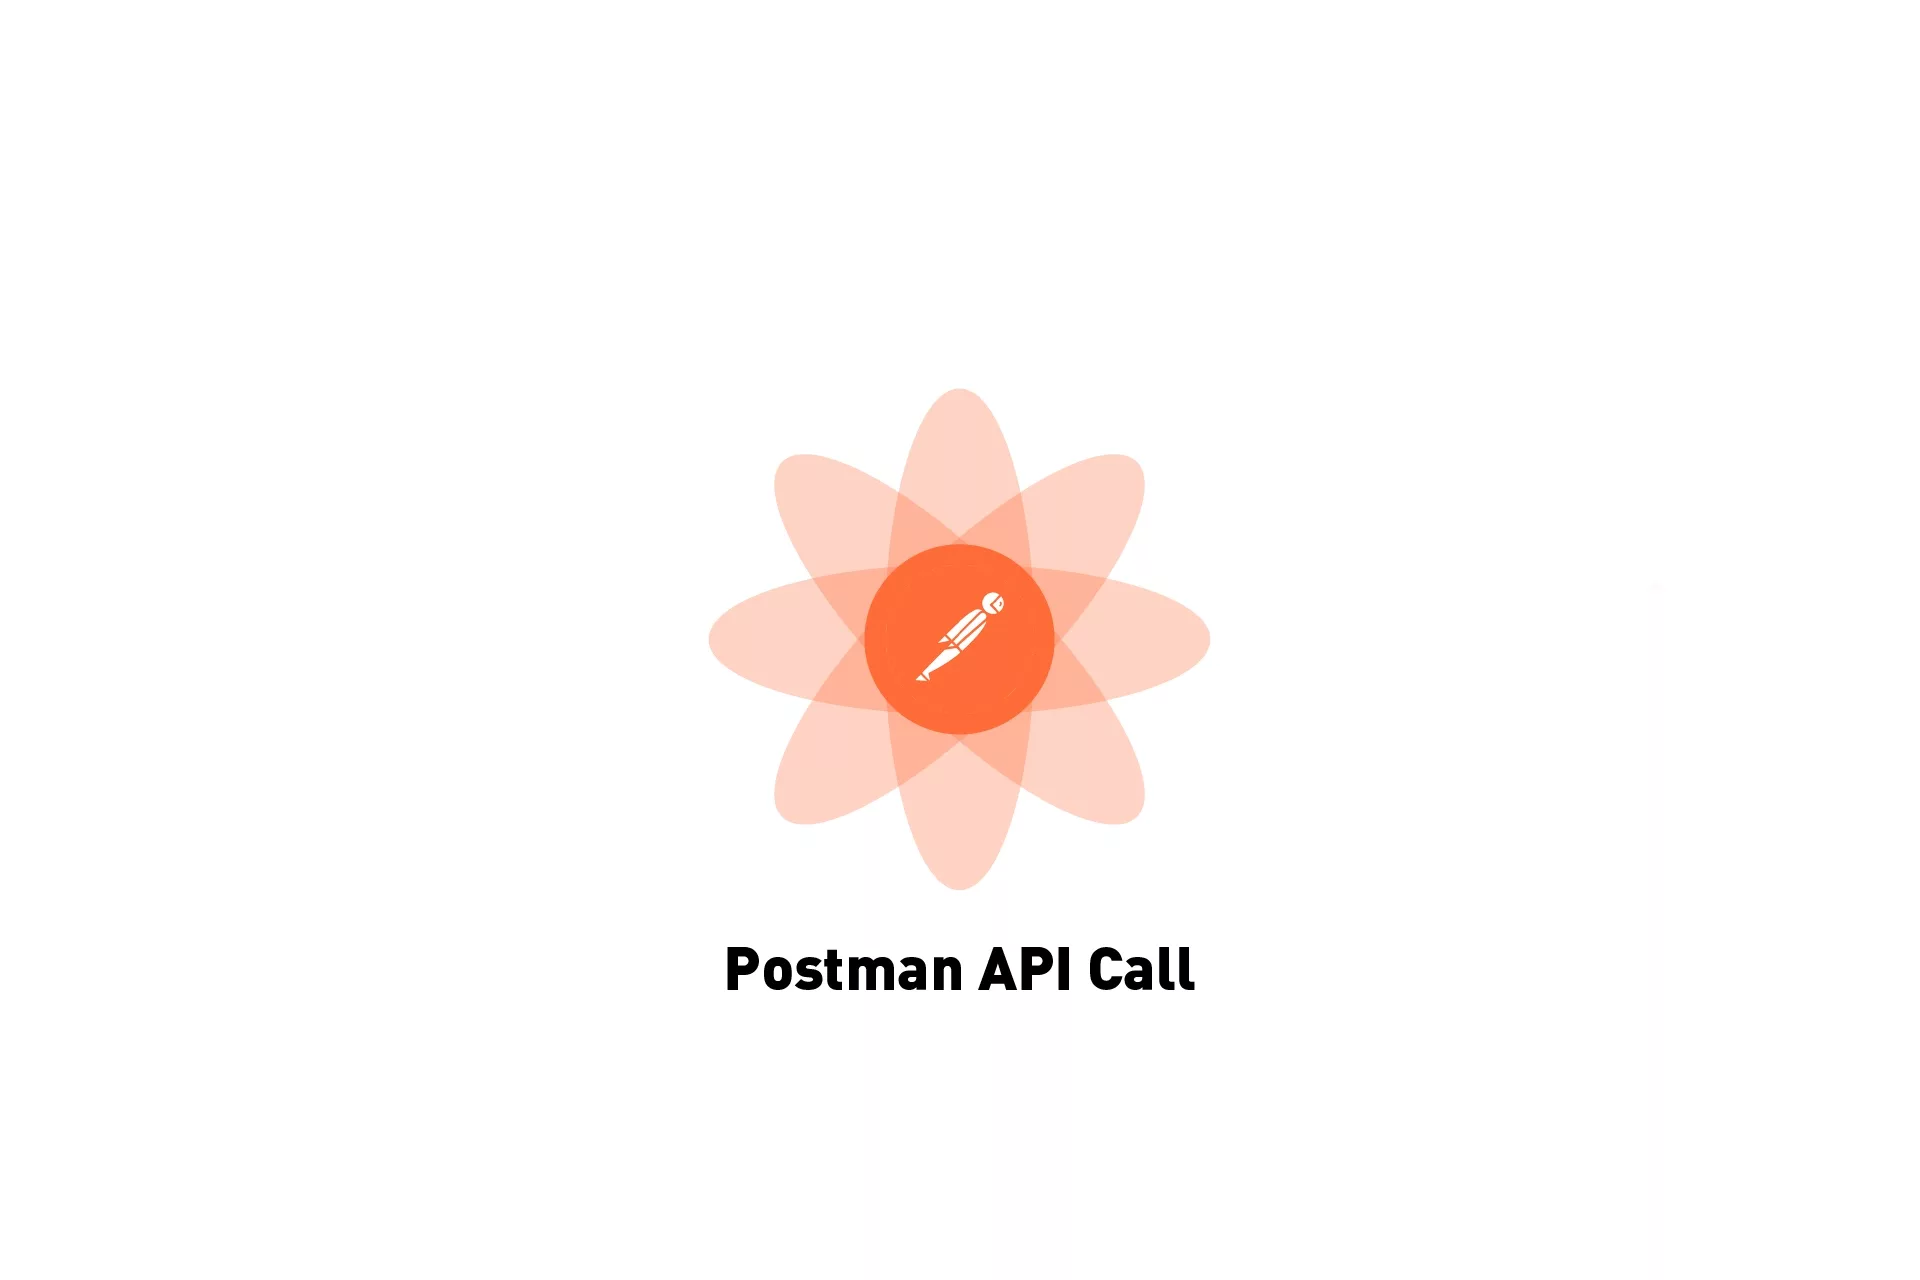 A flower that represents Postman. Beneath it sits the text that states 'Postman API Call'.